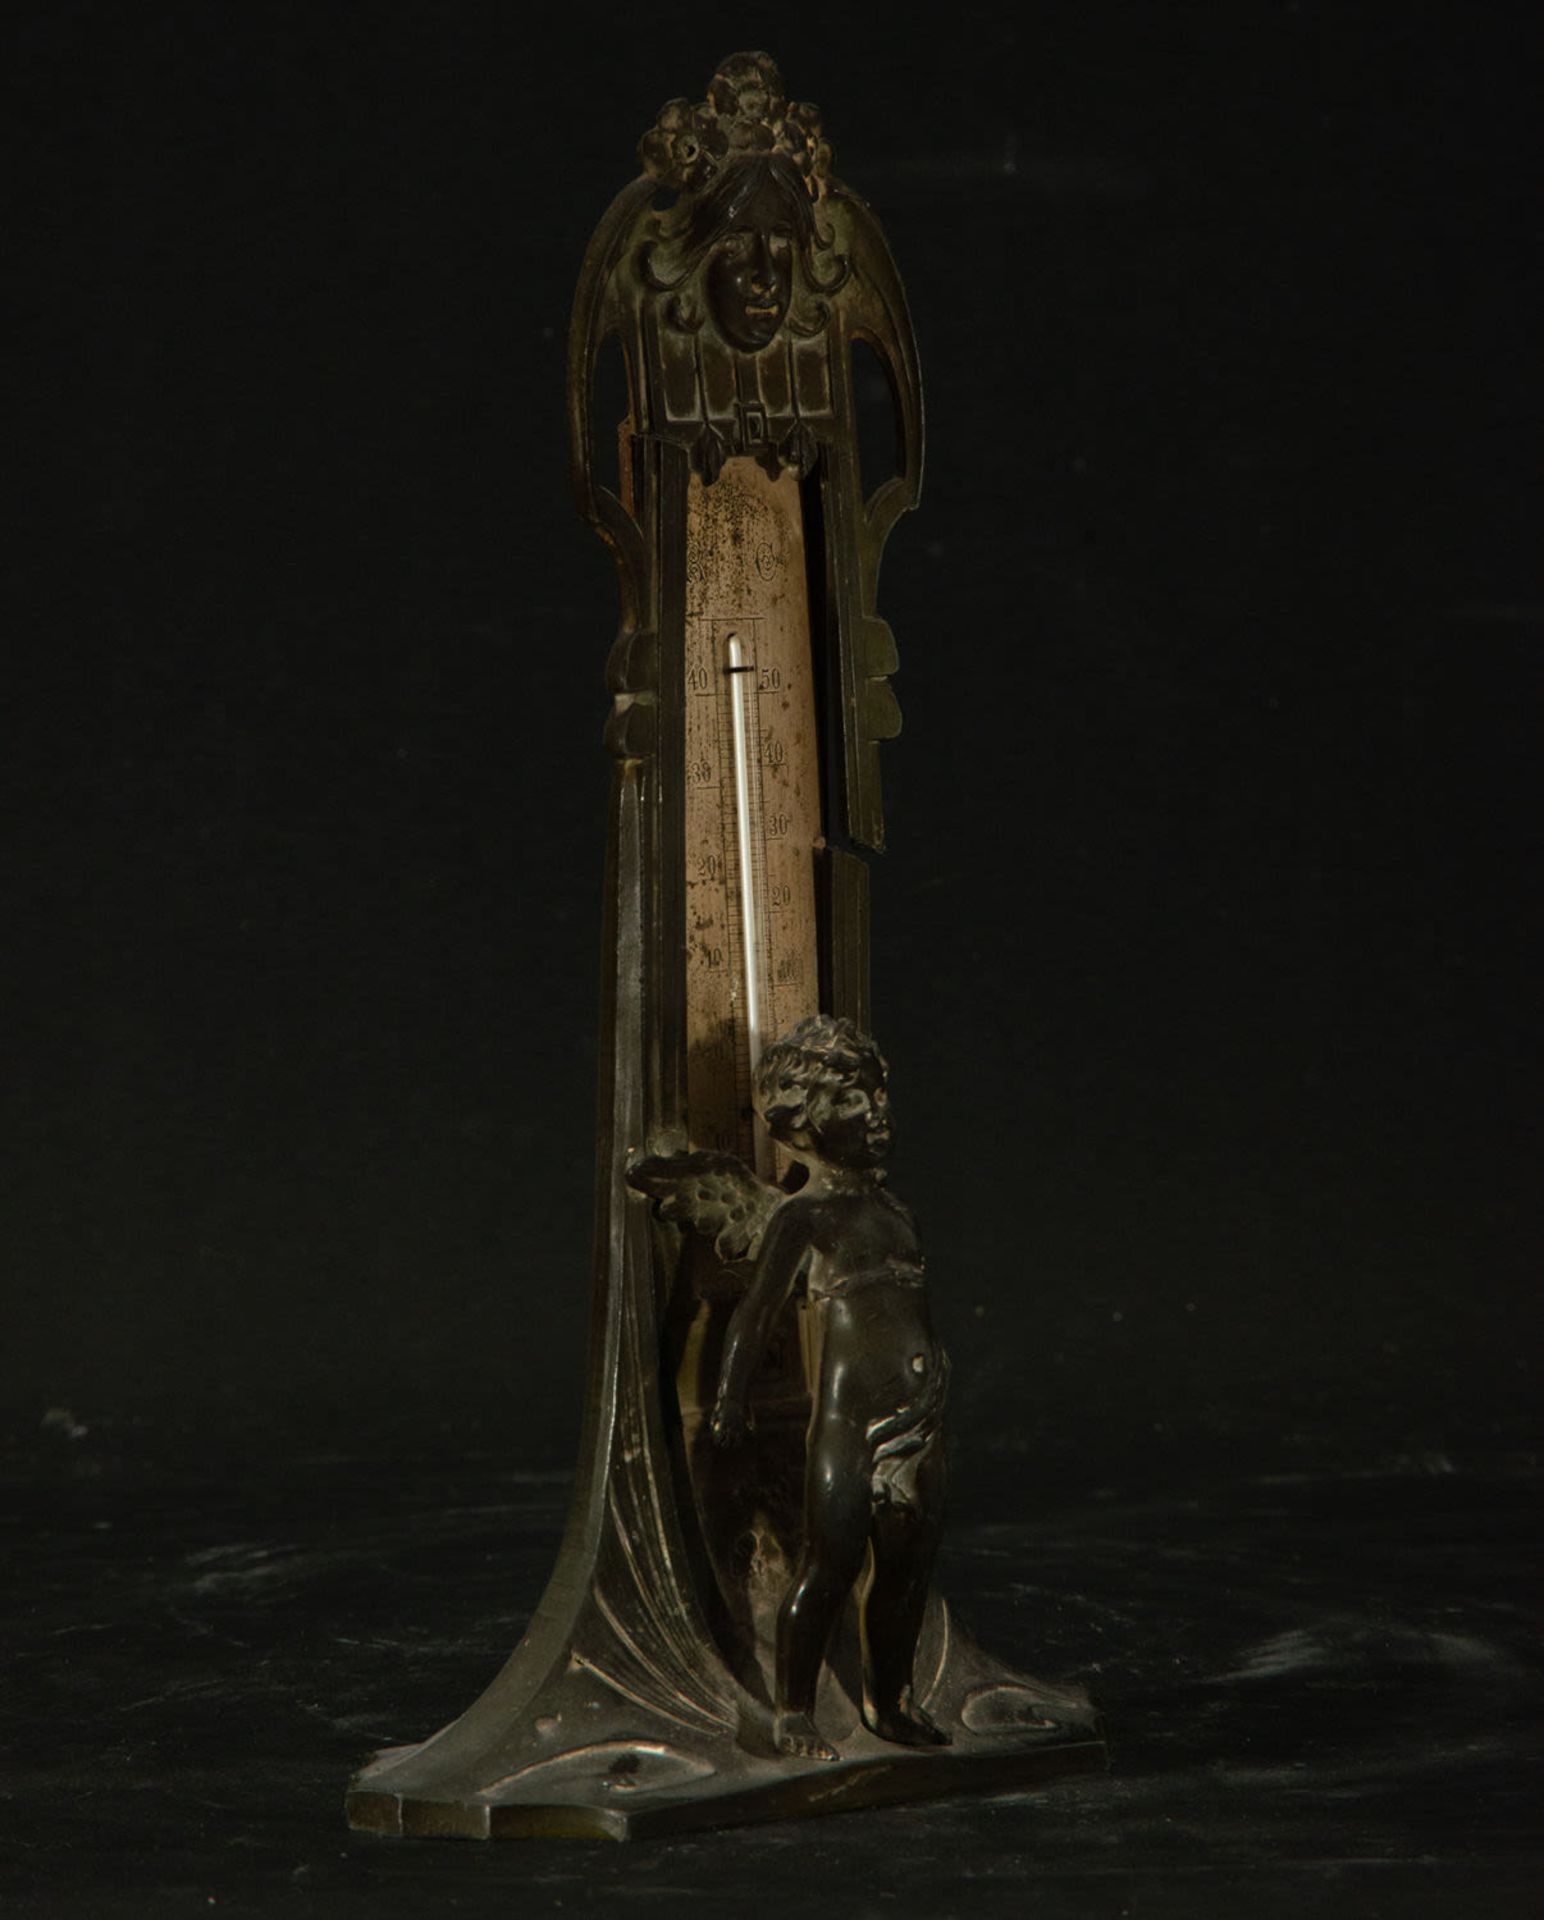 Bronze thermometer holder, 19th century French work - Image 2 of 3